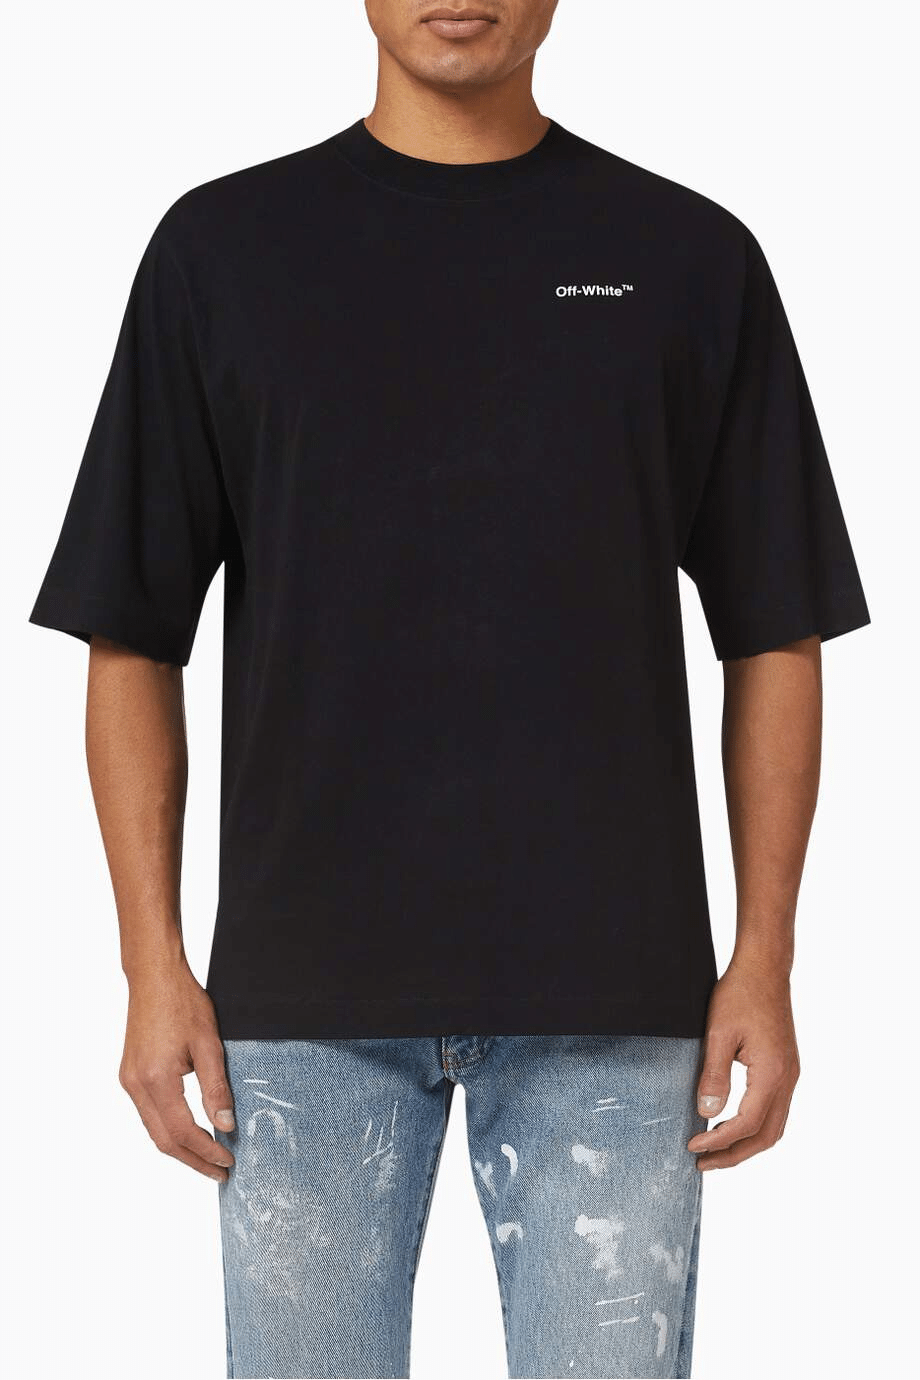 OFF-WHITE Caravaggio Crownin Skate T-shirt in Cotton